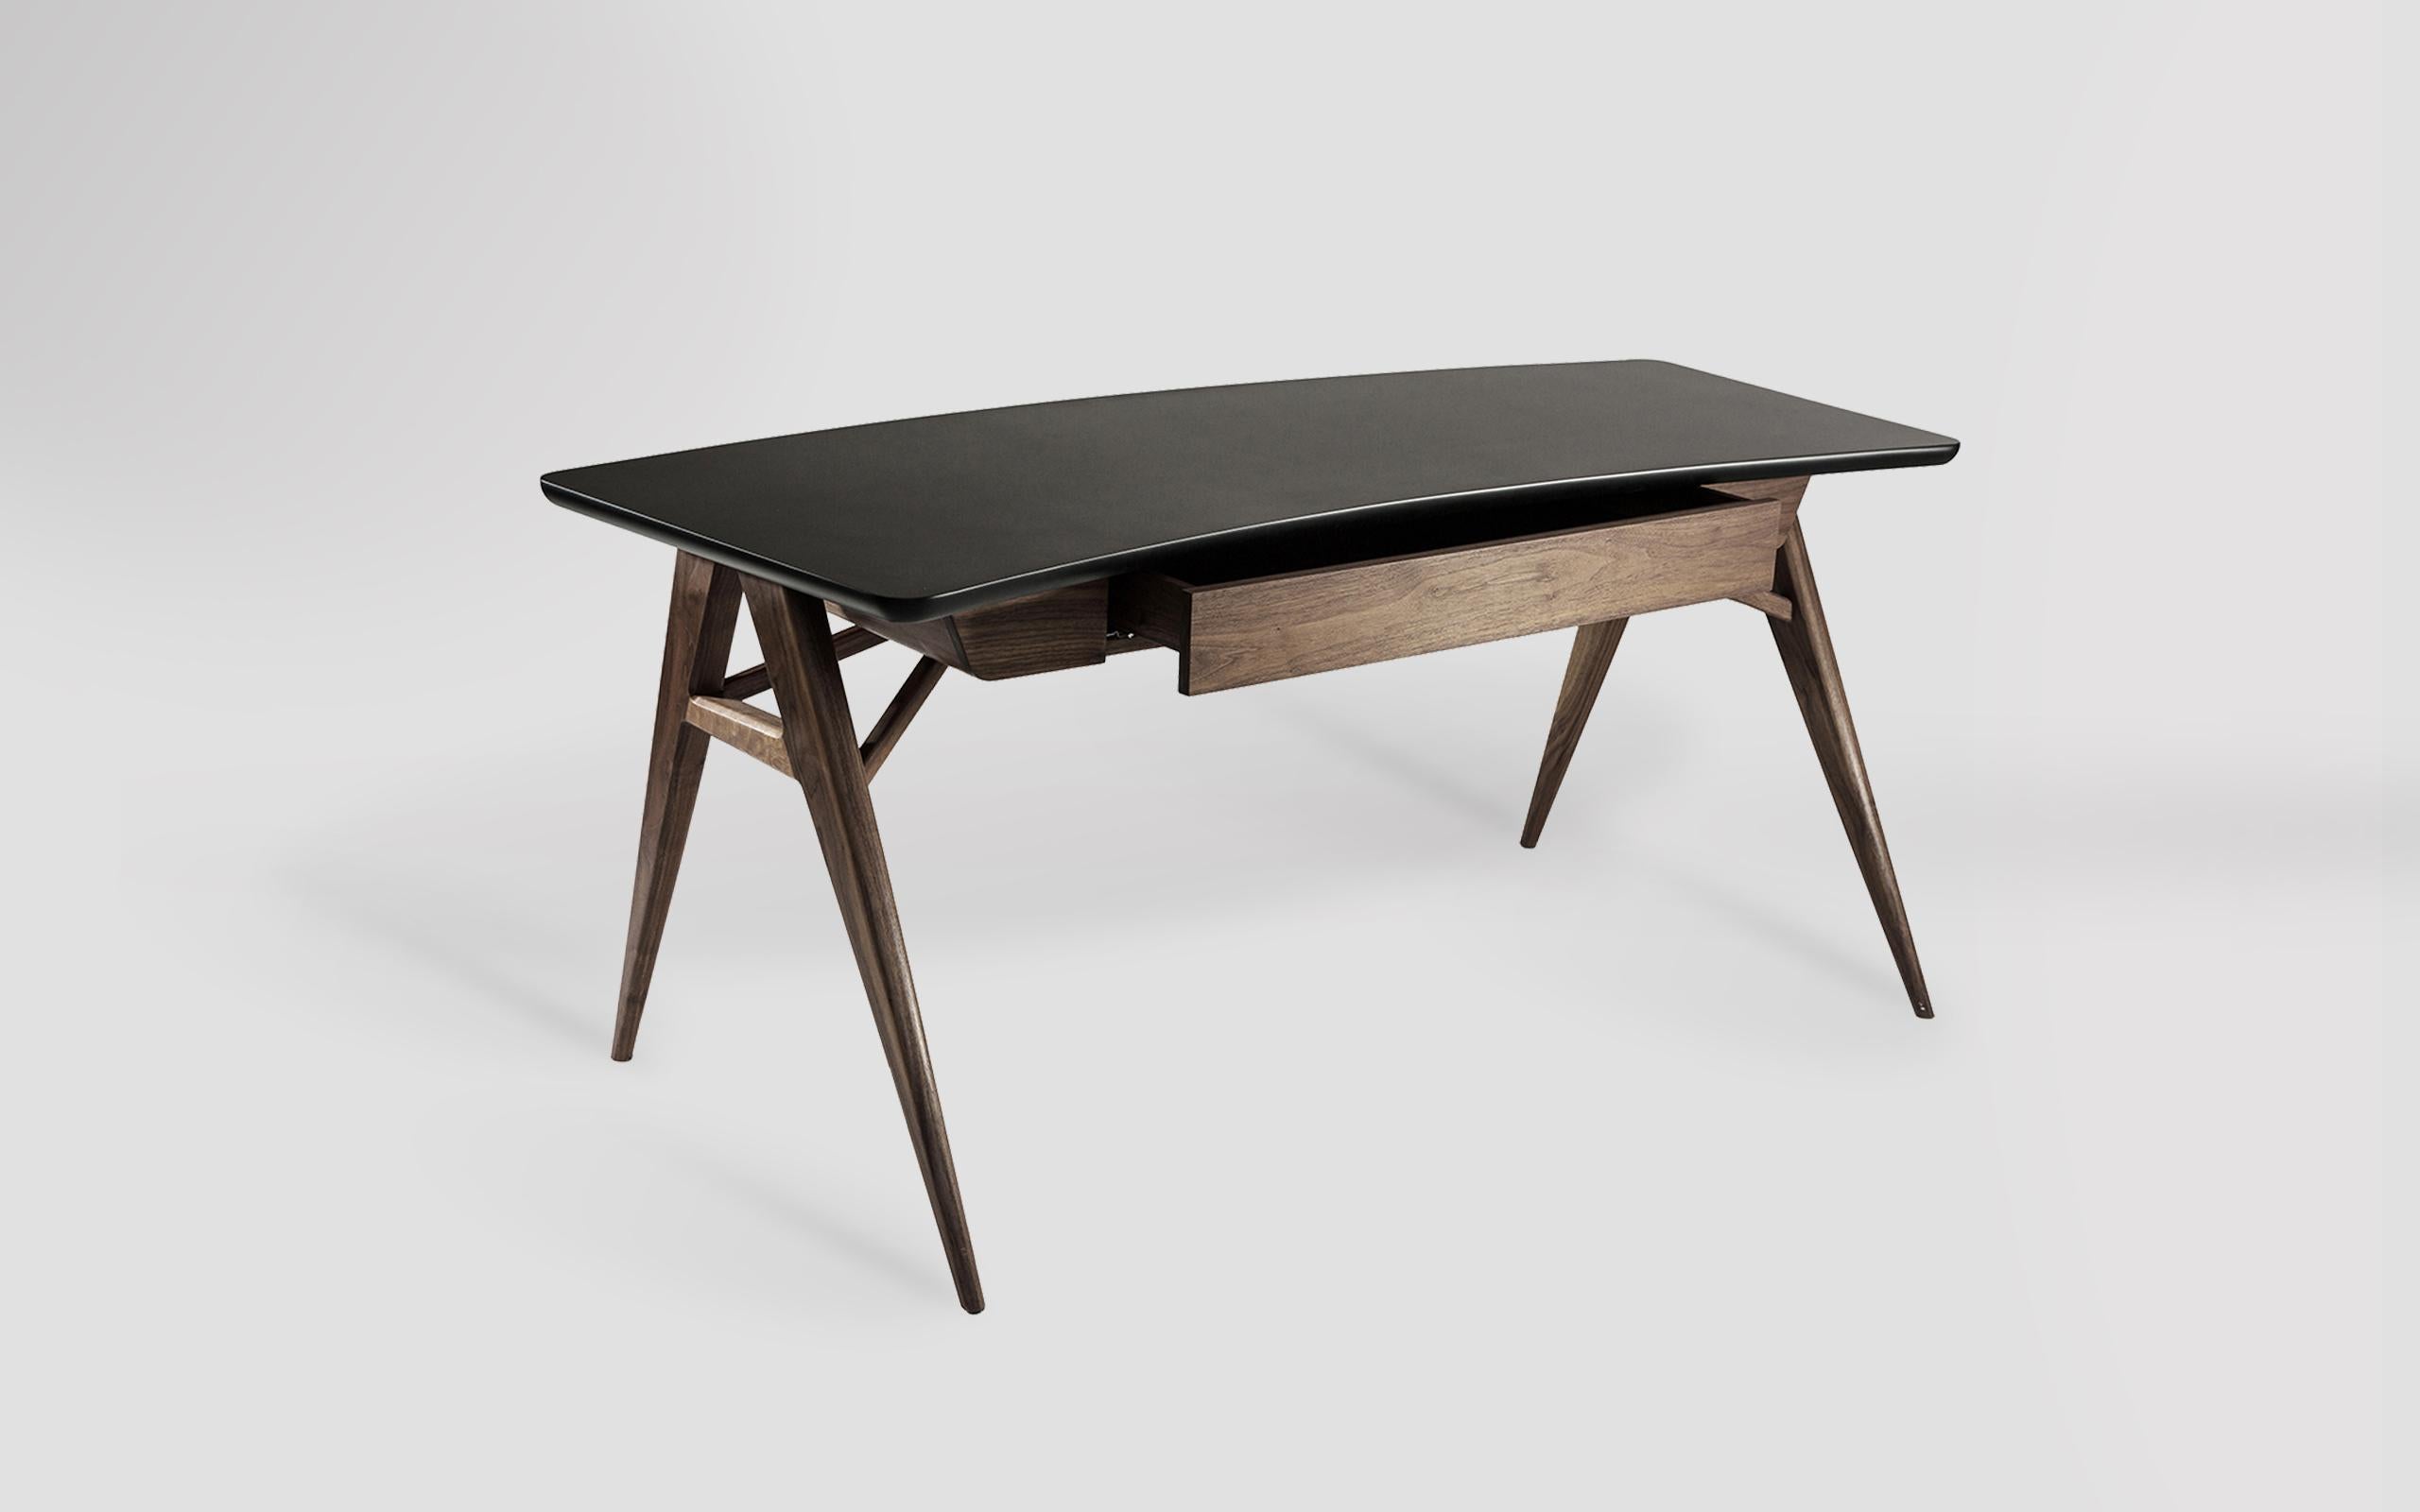 Roos desk by Atra Design
Dimensions: D 182.6 x W 78.1 x H 74.9 cm
Materials: walnut wood
Other woods available.

Atra Design
We are Atra, a furniture brand produced by Atra form a mexico city–based high end production facility that also houses our